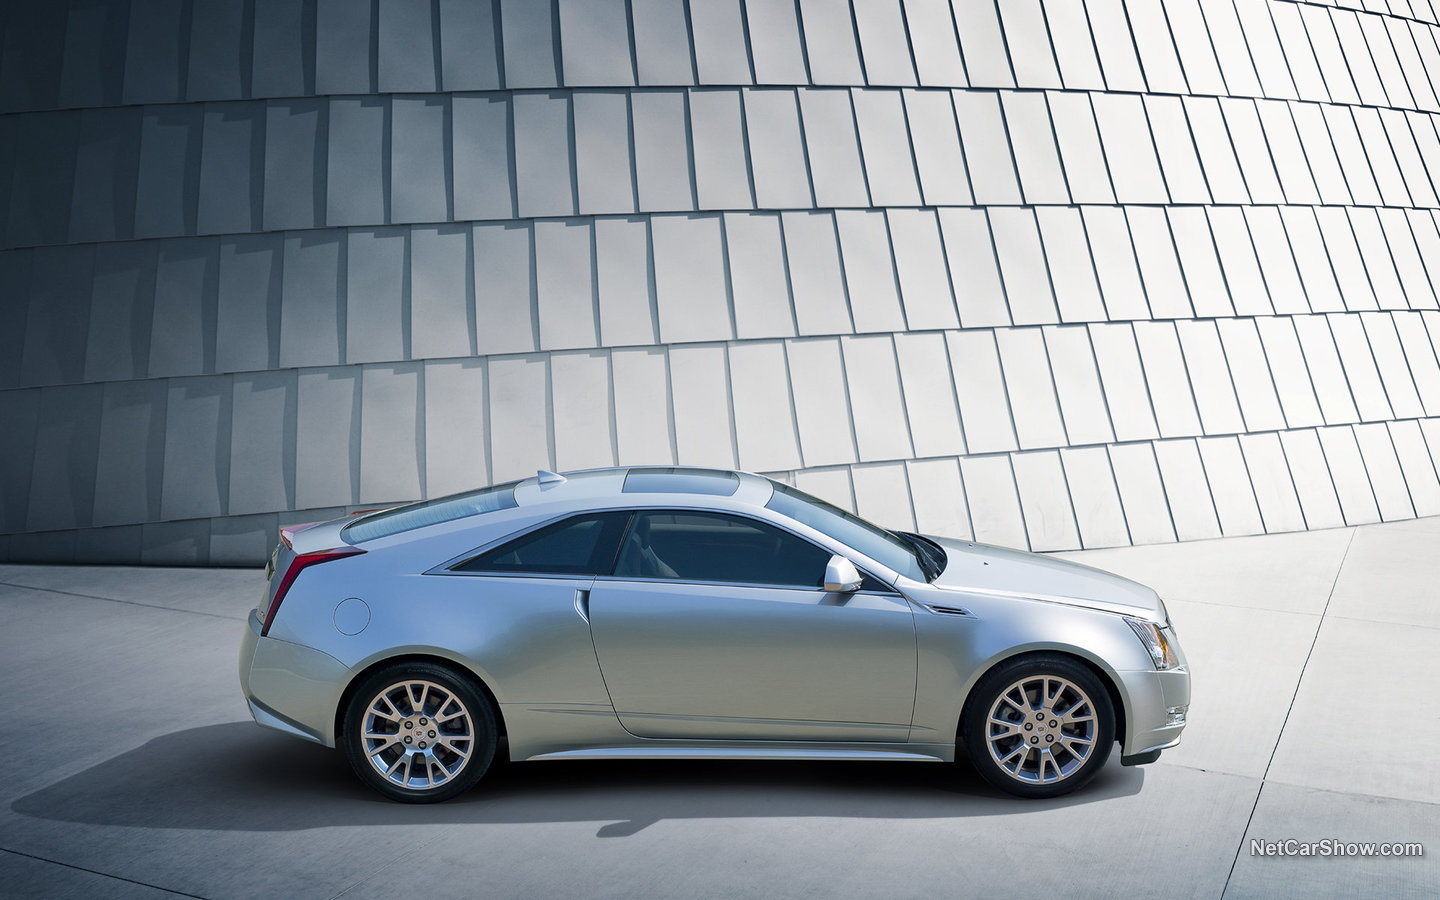 Cadillac CTS Coupe 2011 fd9c3bba